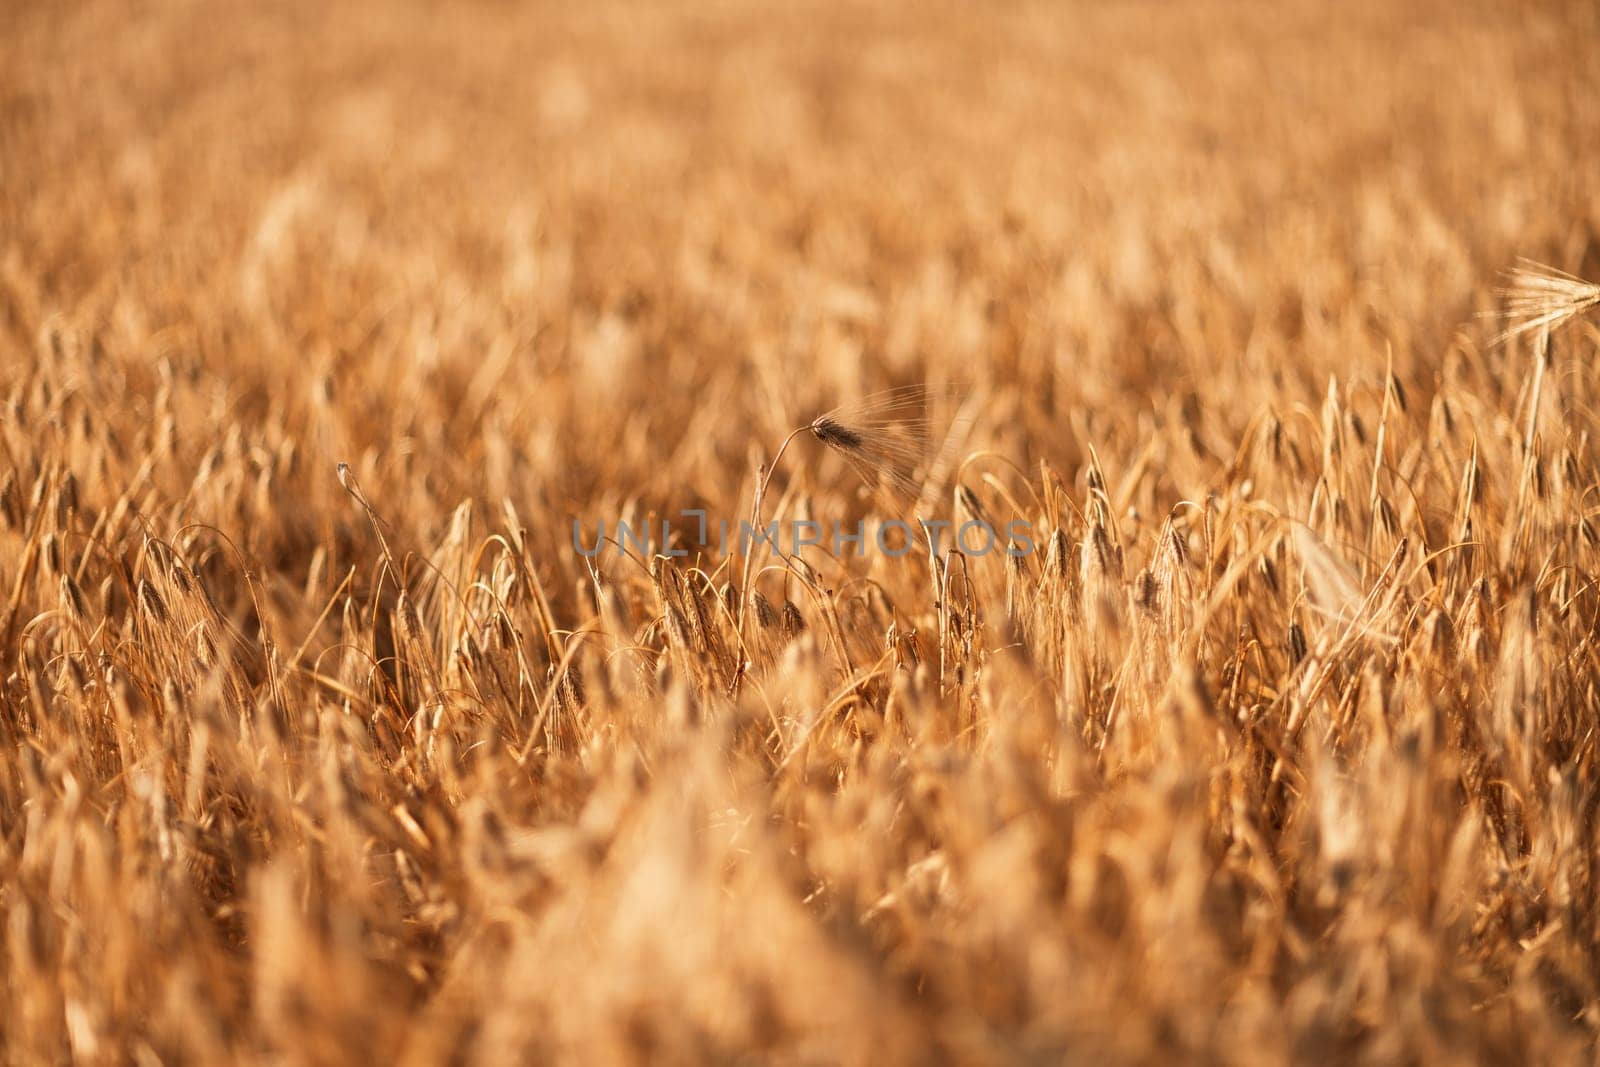 A field of tall, dry grass with a few weeds in it. Scene is somewhat desolate and barren, with the dry grass